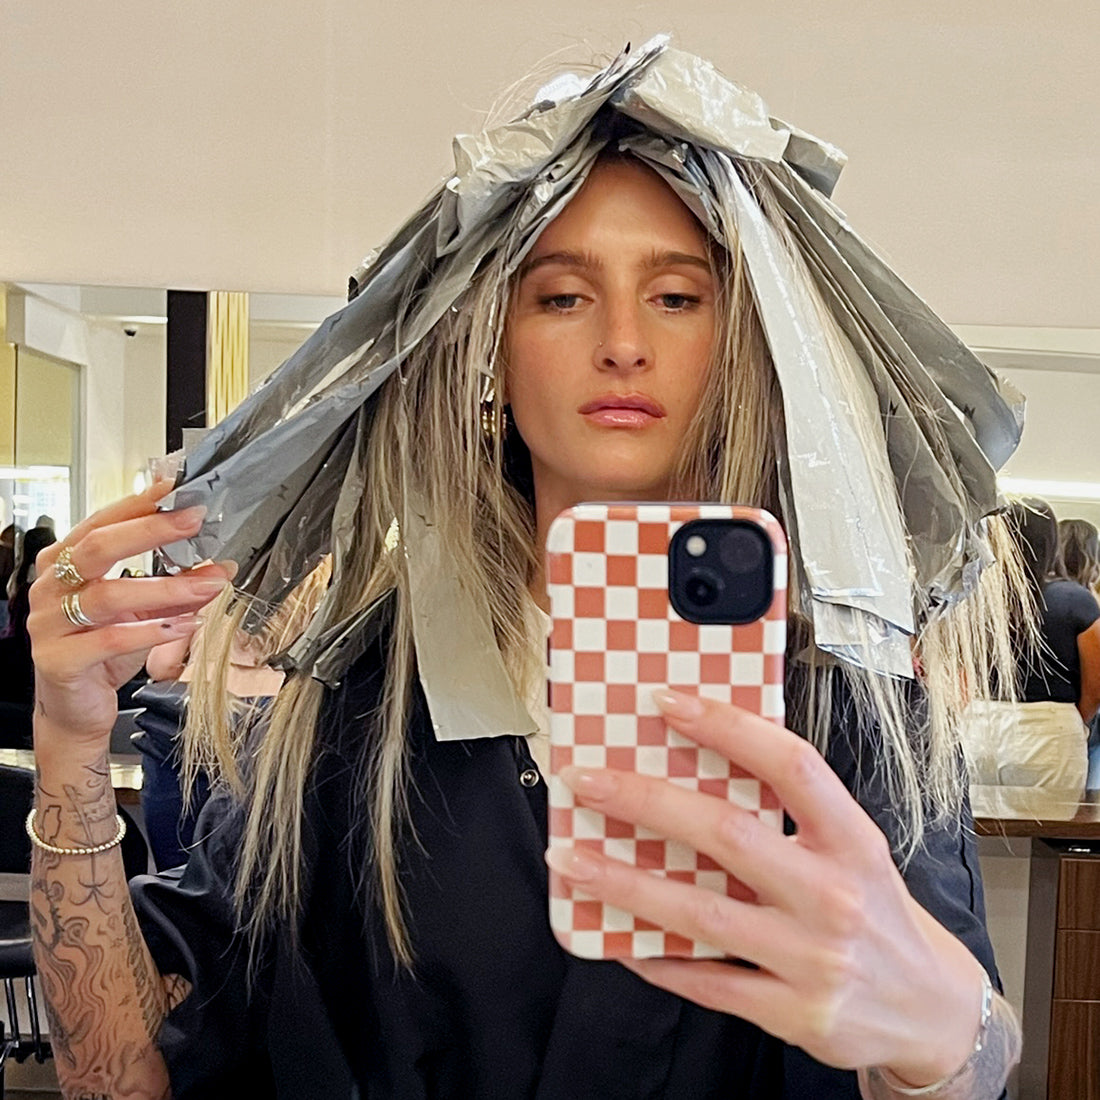 Power of hair foiling! Why use hair colouring foils and difference bet